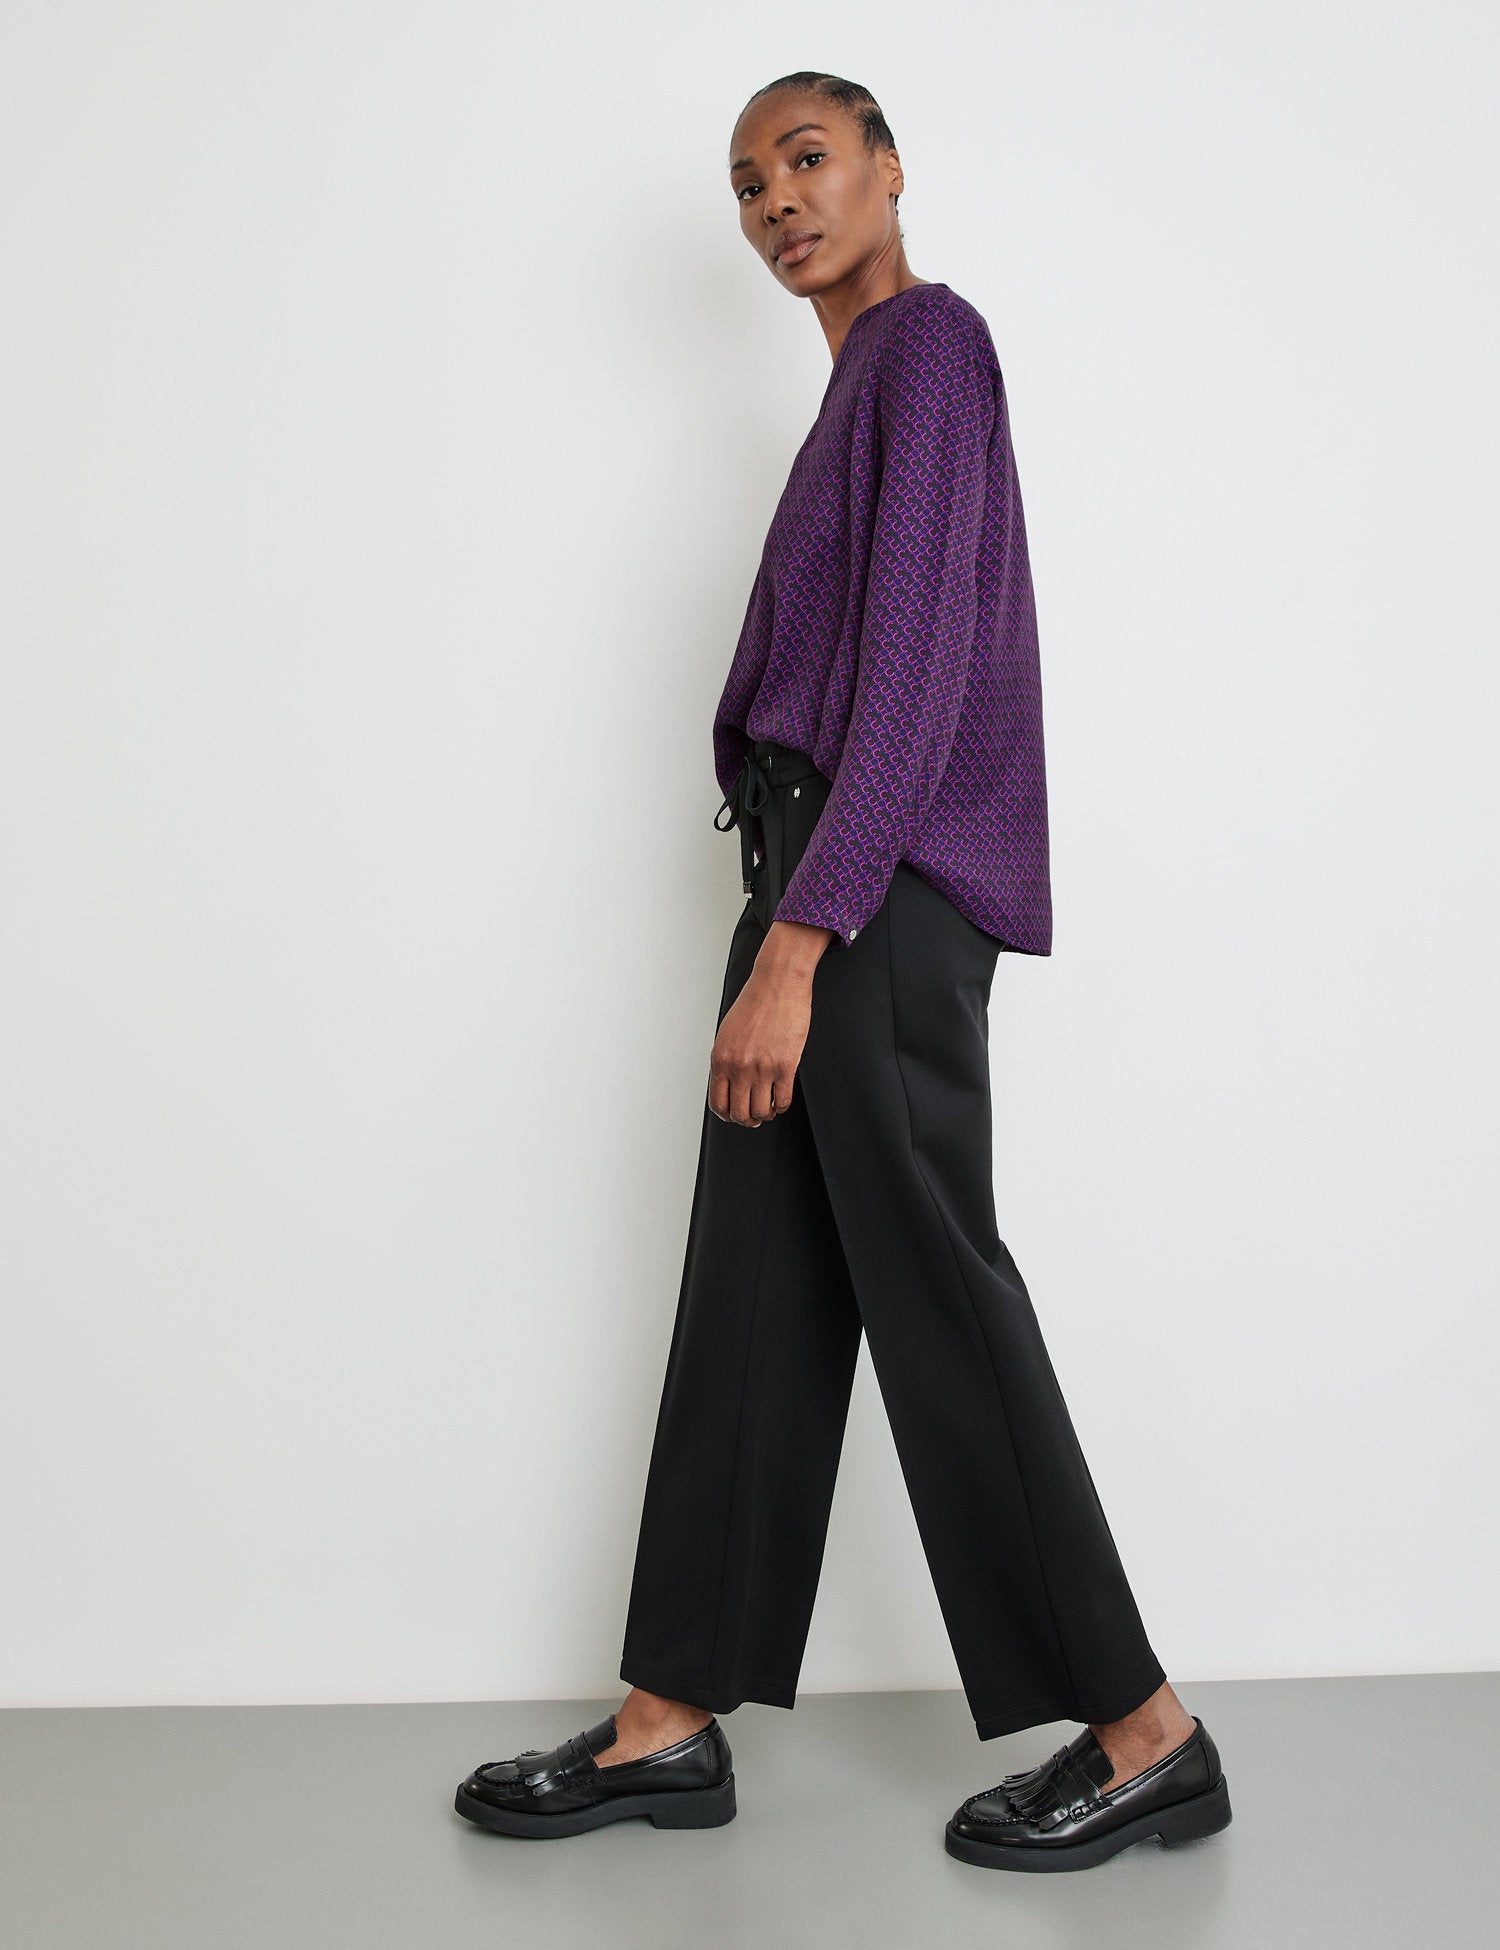 Fashionable Cloth Trousers With A Wide Leg, Vertical Pintucks And An Elasticated Waistband_122077-66211_11000_05